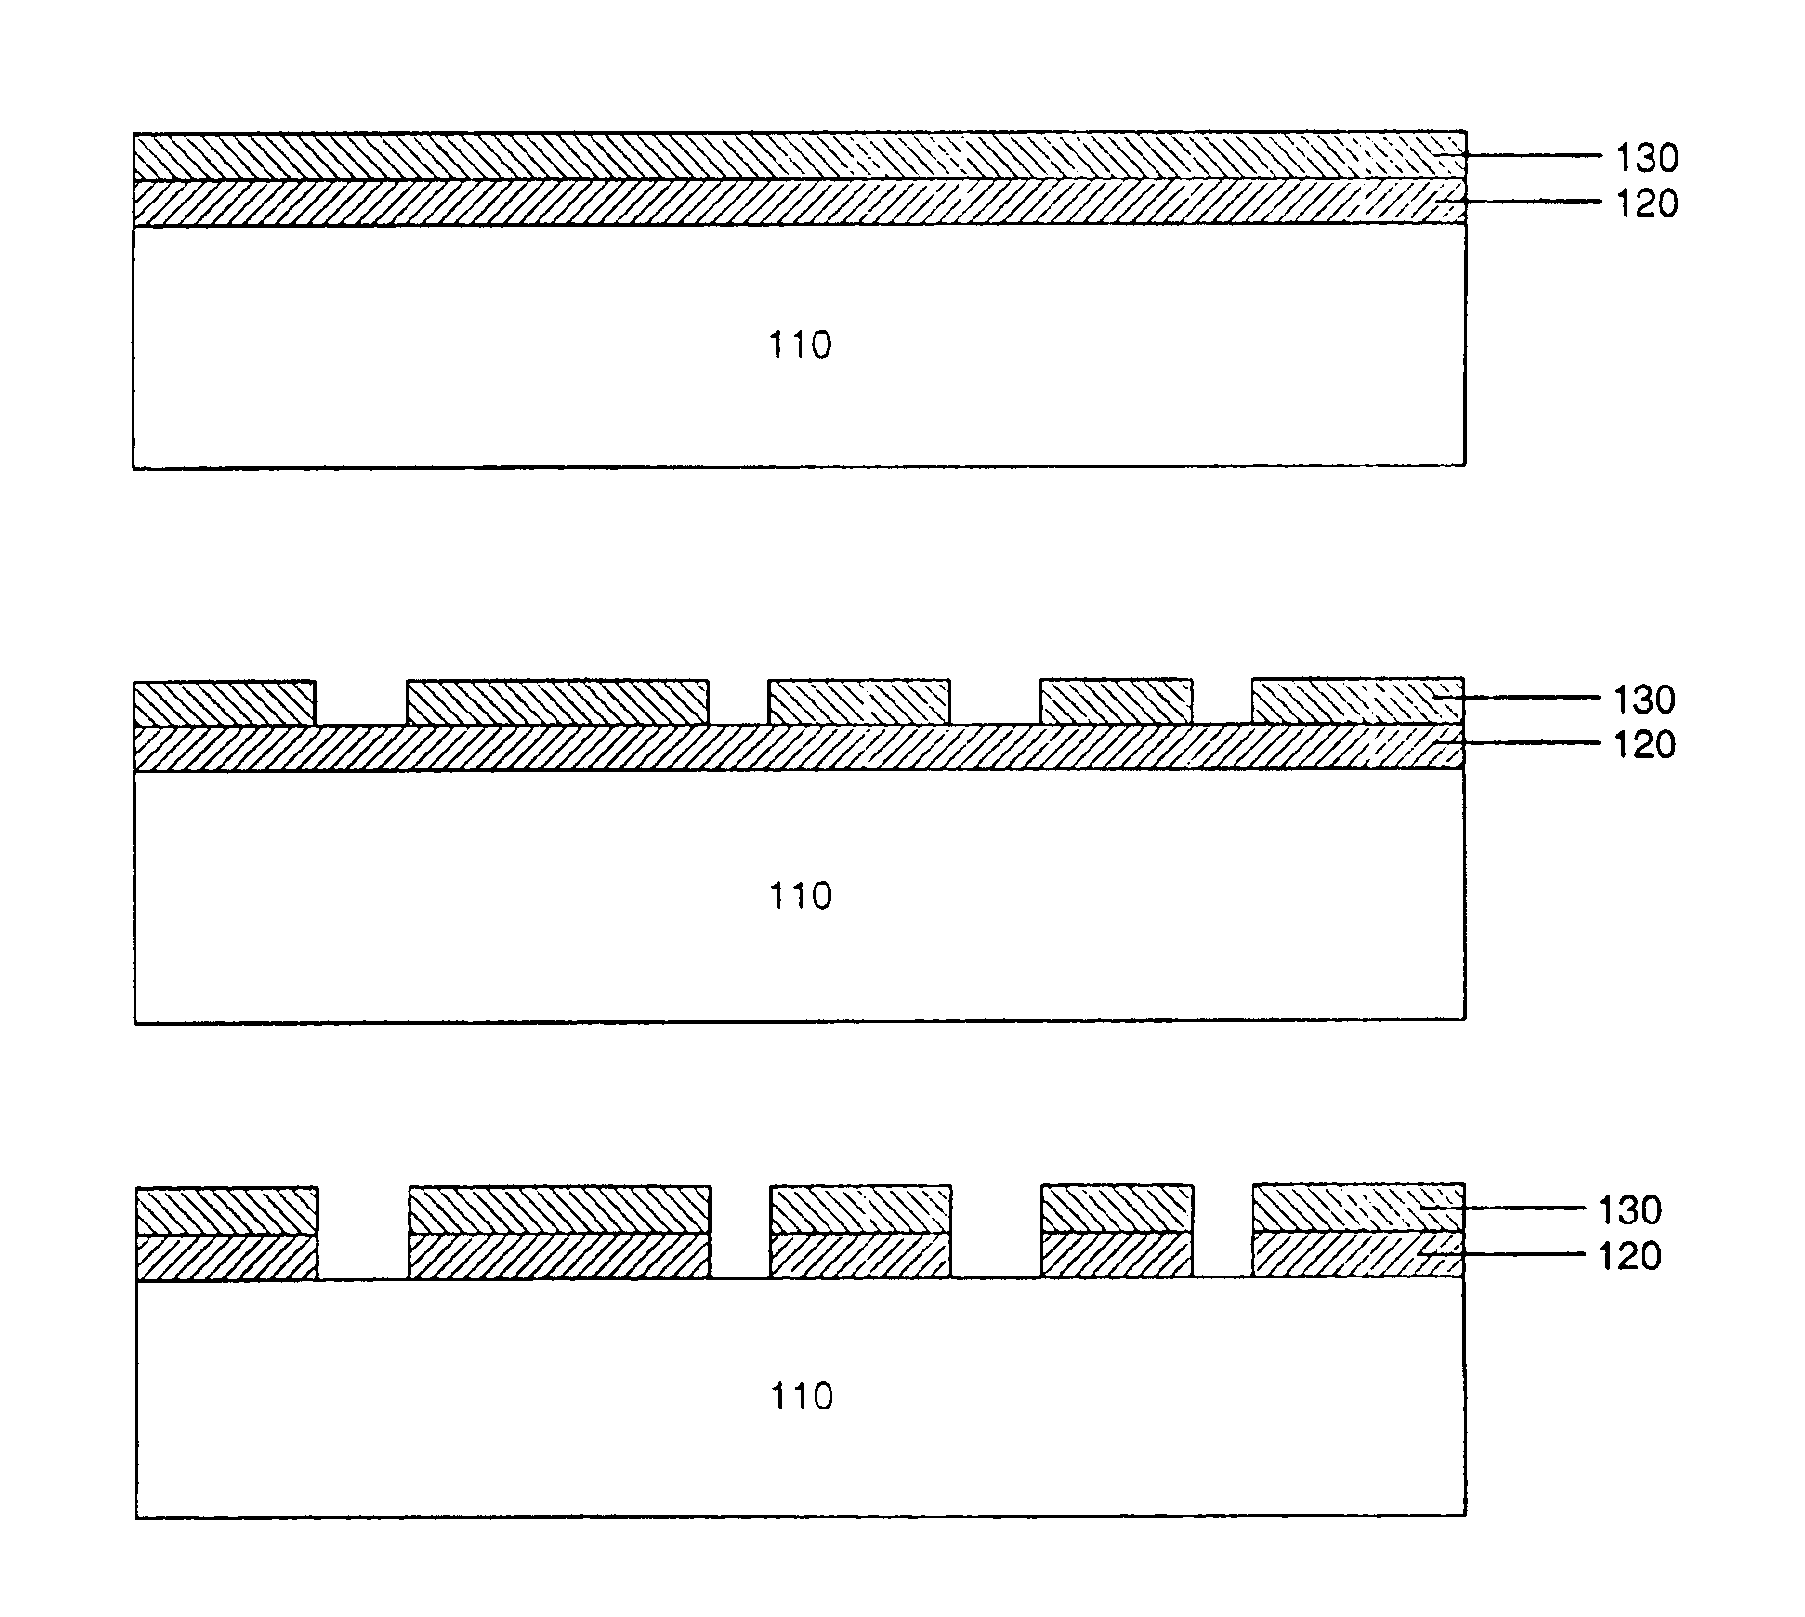 Methods of inspecting a lithography template